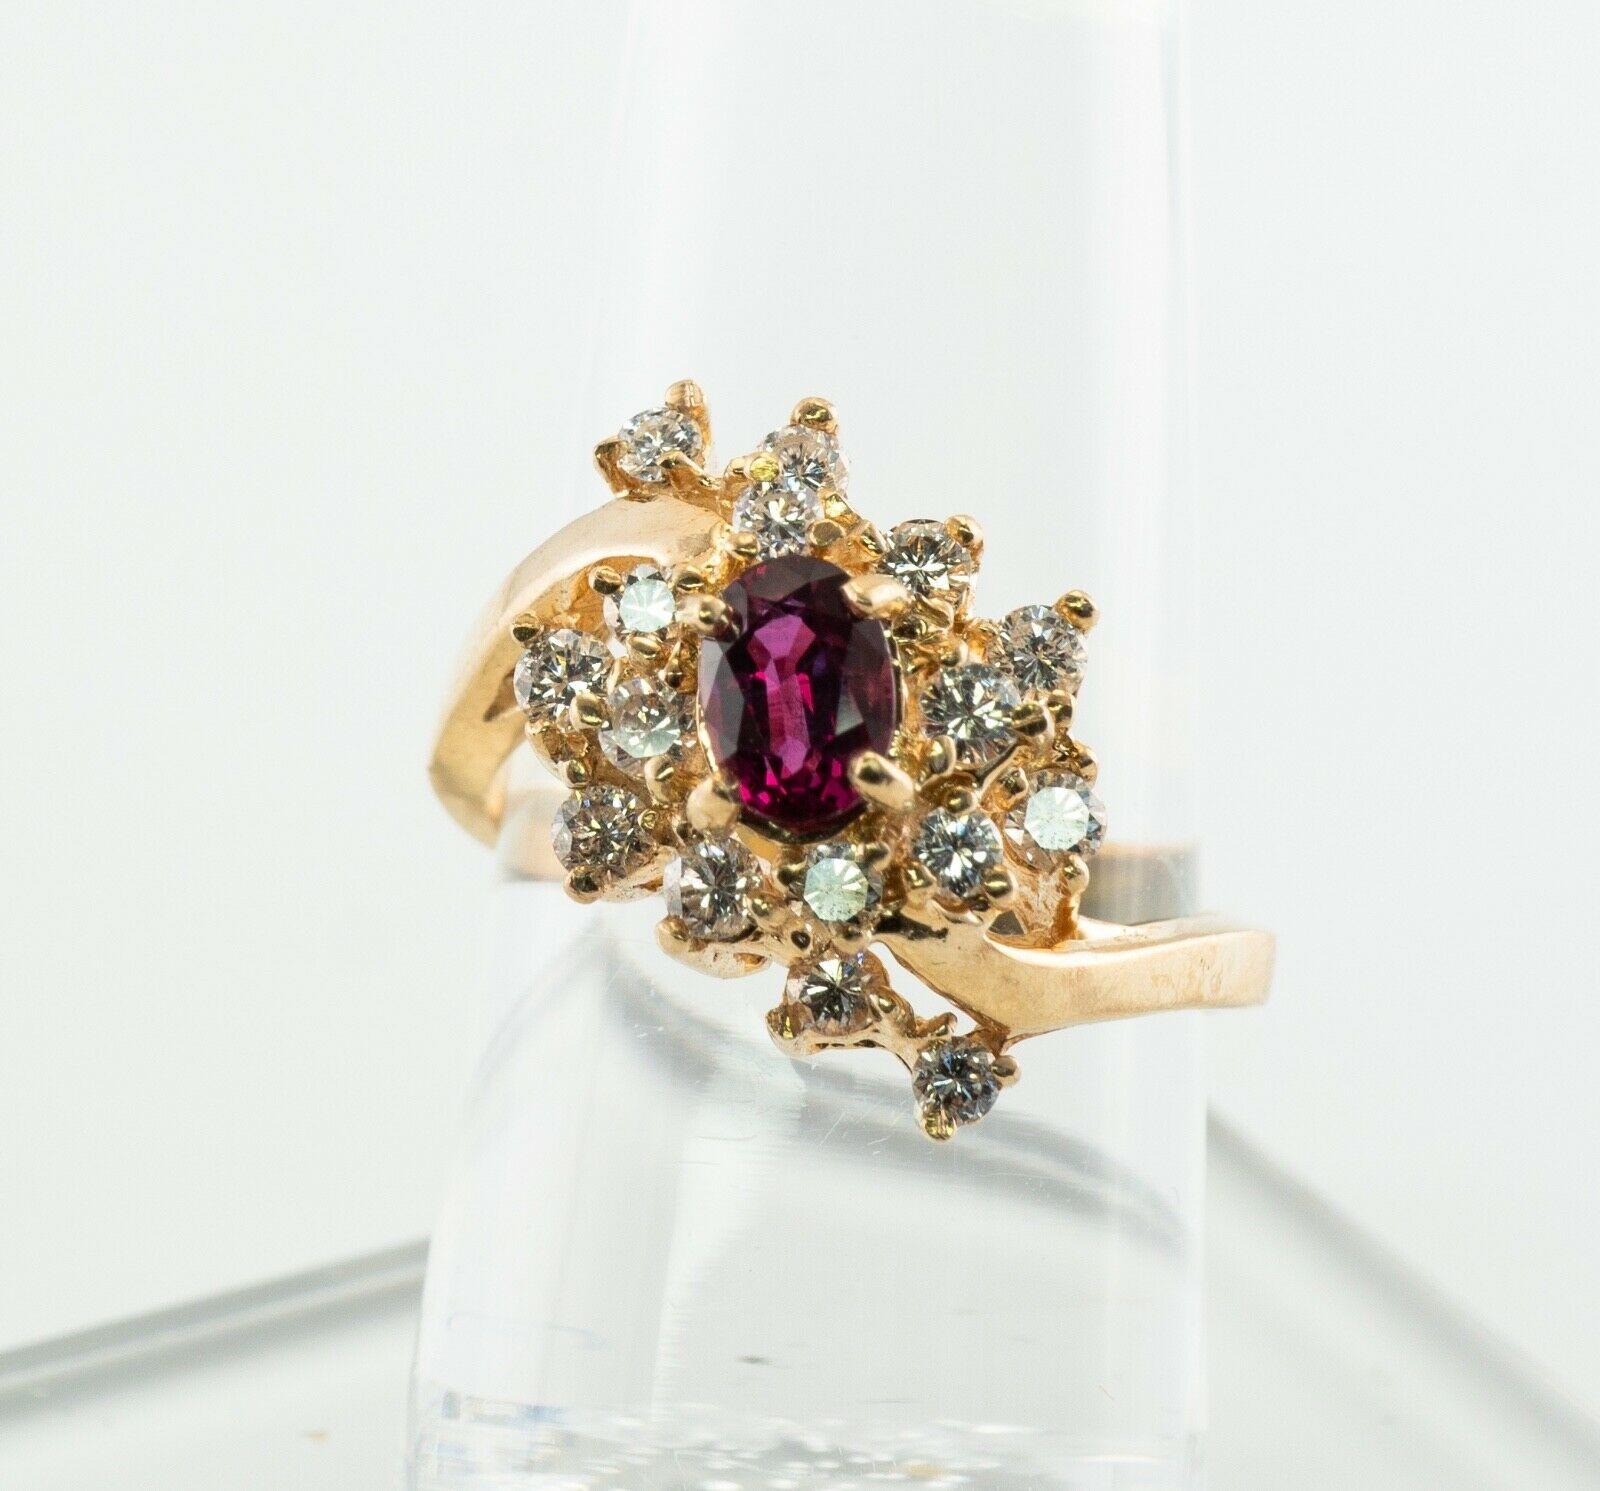 This lovely estate ring is finely crafted in solid 14K Yellow Gold and set with natural Earth mined Rubellite and diamonds. The center oval cut stone measures 6mm x 4mm (.60 carat). This is a very clean and transparent gem of great intensity and